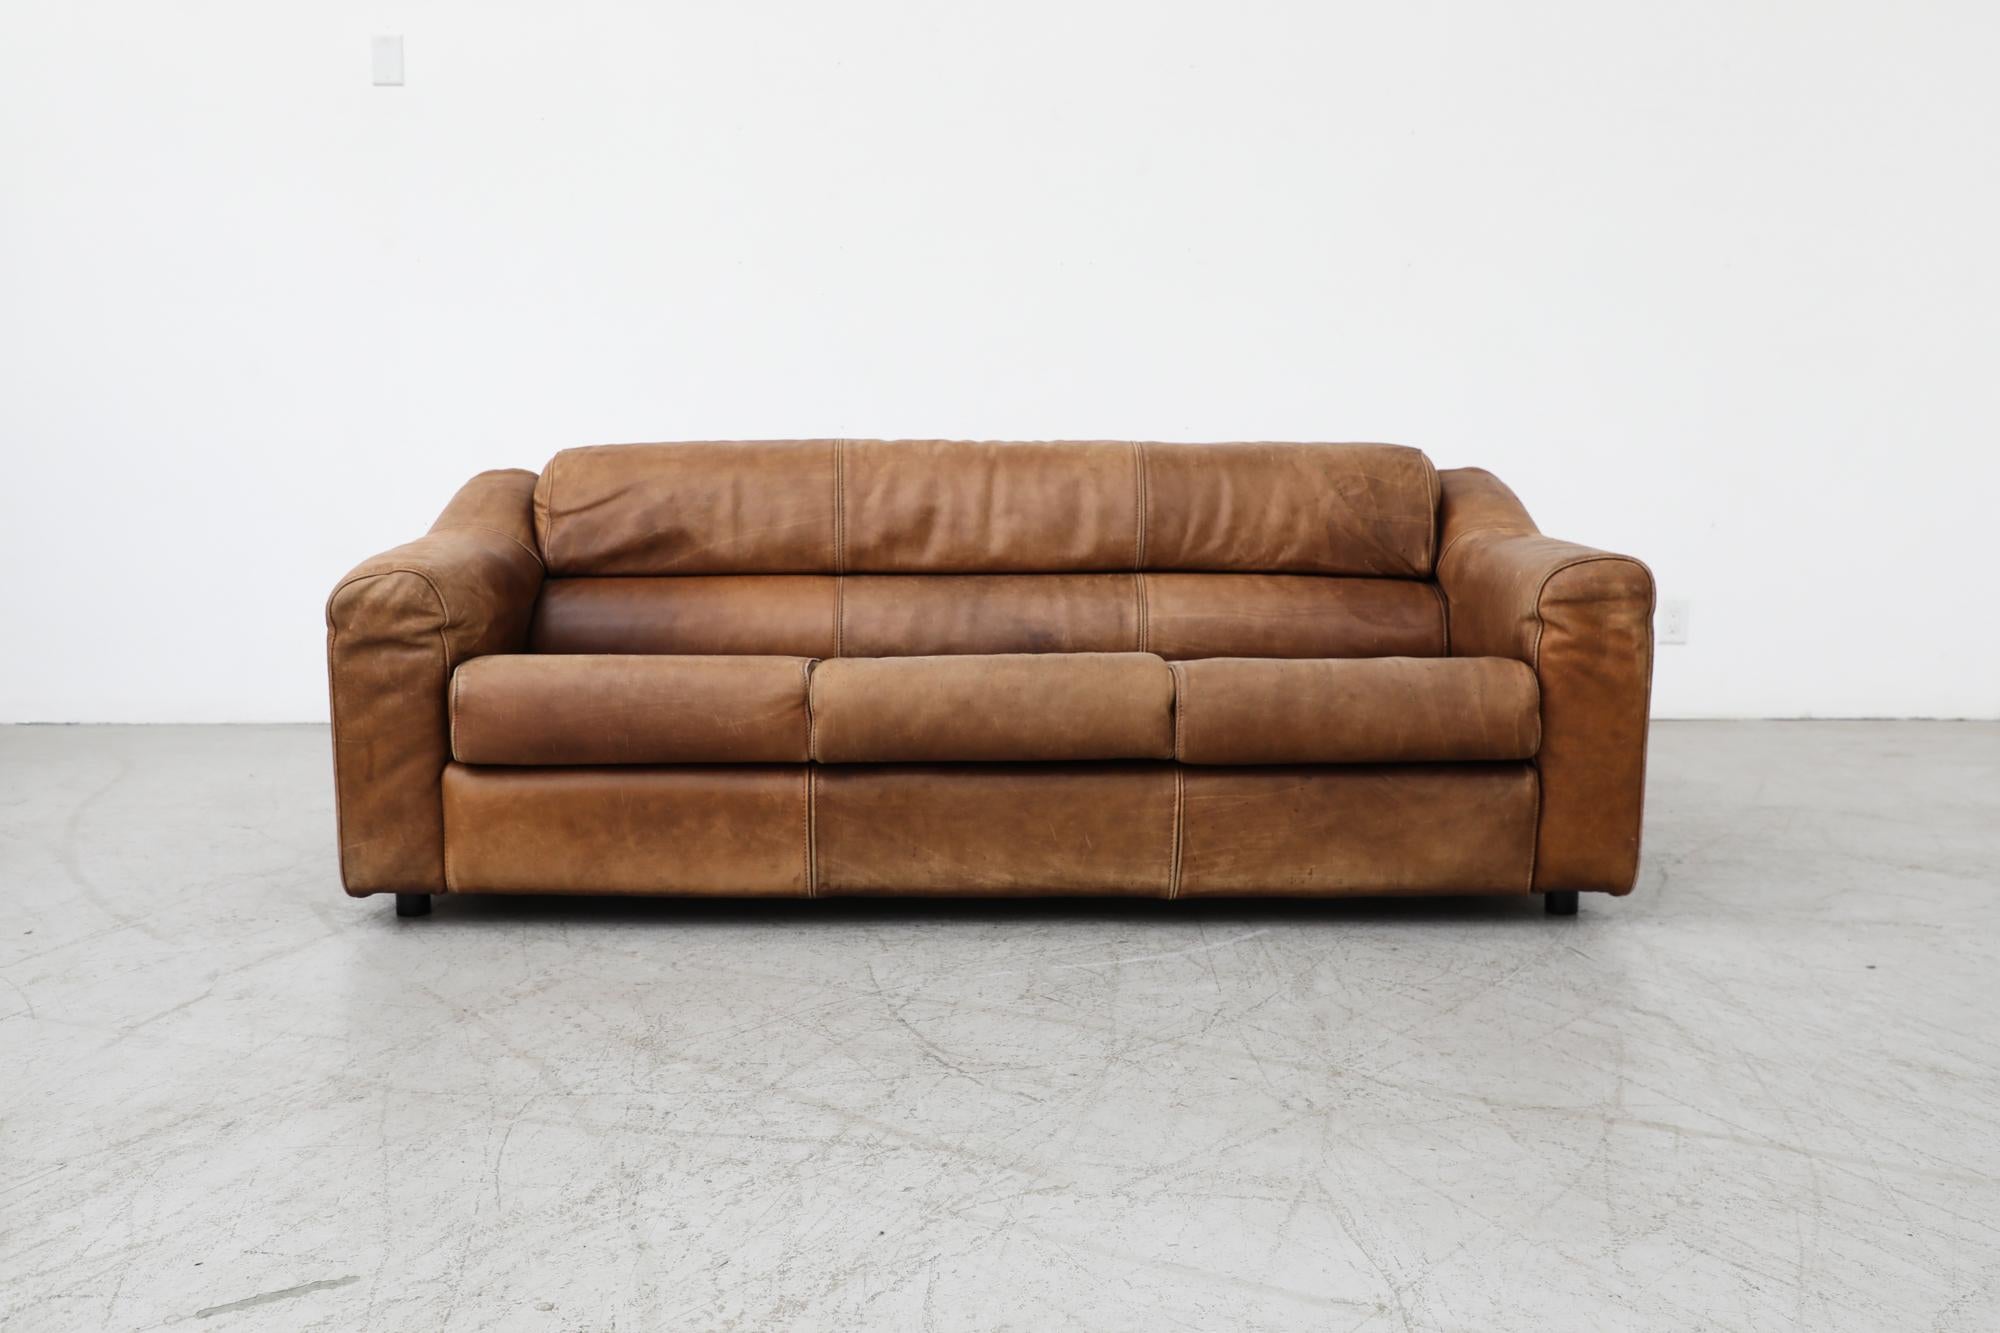 Midcentury large leather three seater sofa with beautiful patina. In the style of Montis designer Gerard van den Berg. In original condition with heavy visible wear including scratching and sun fading. Wear is consistent with its age and use.